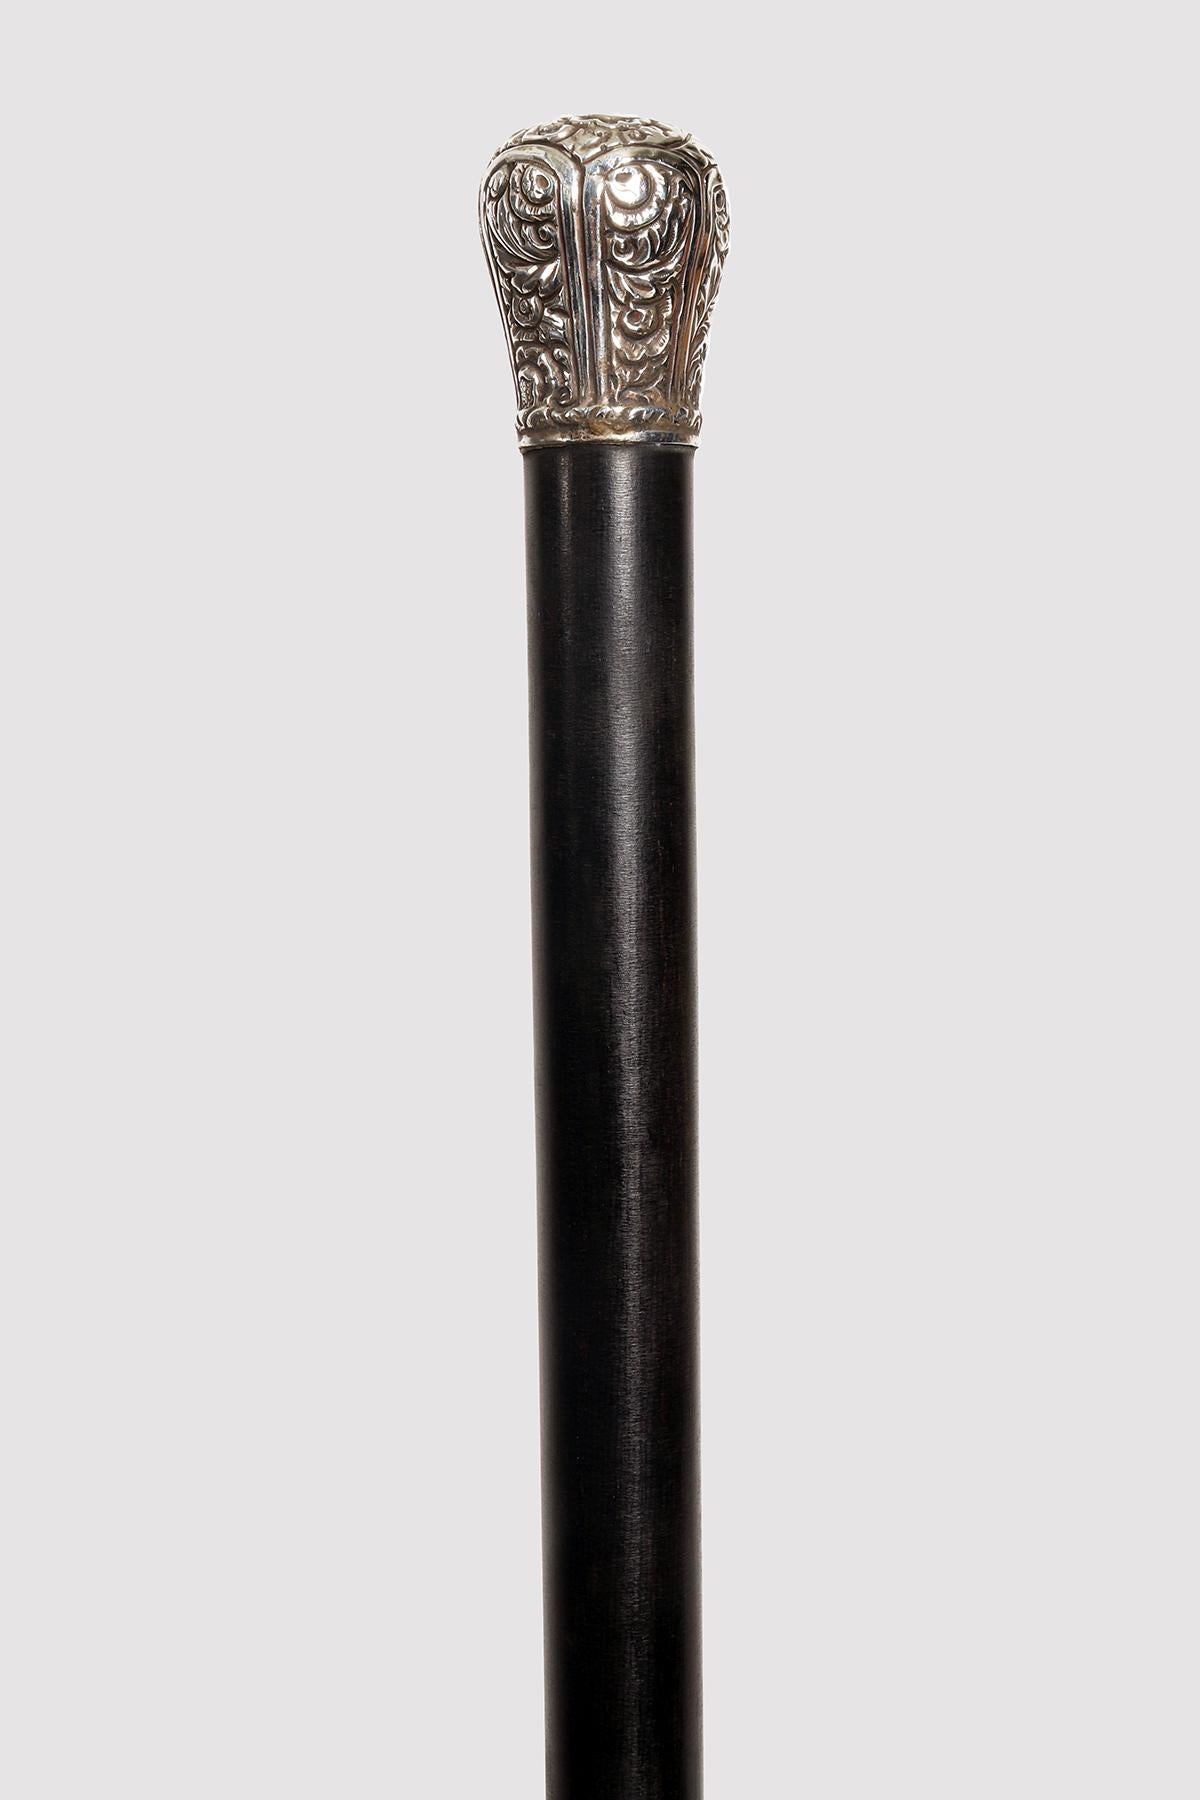 Walking stick with silver-plated copper and iron tip. The shaft is made of ebony. The milord pommel, made of embossed silver, has a series of smooth vertical bands that separate it. Floral elements. Italy, around 1900.